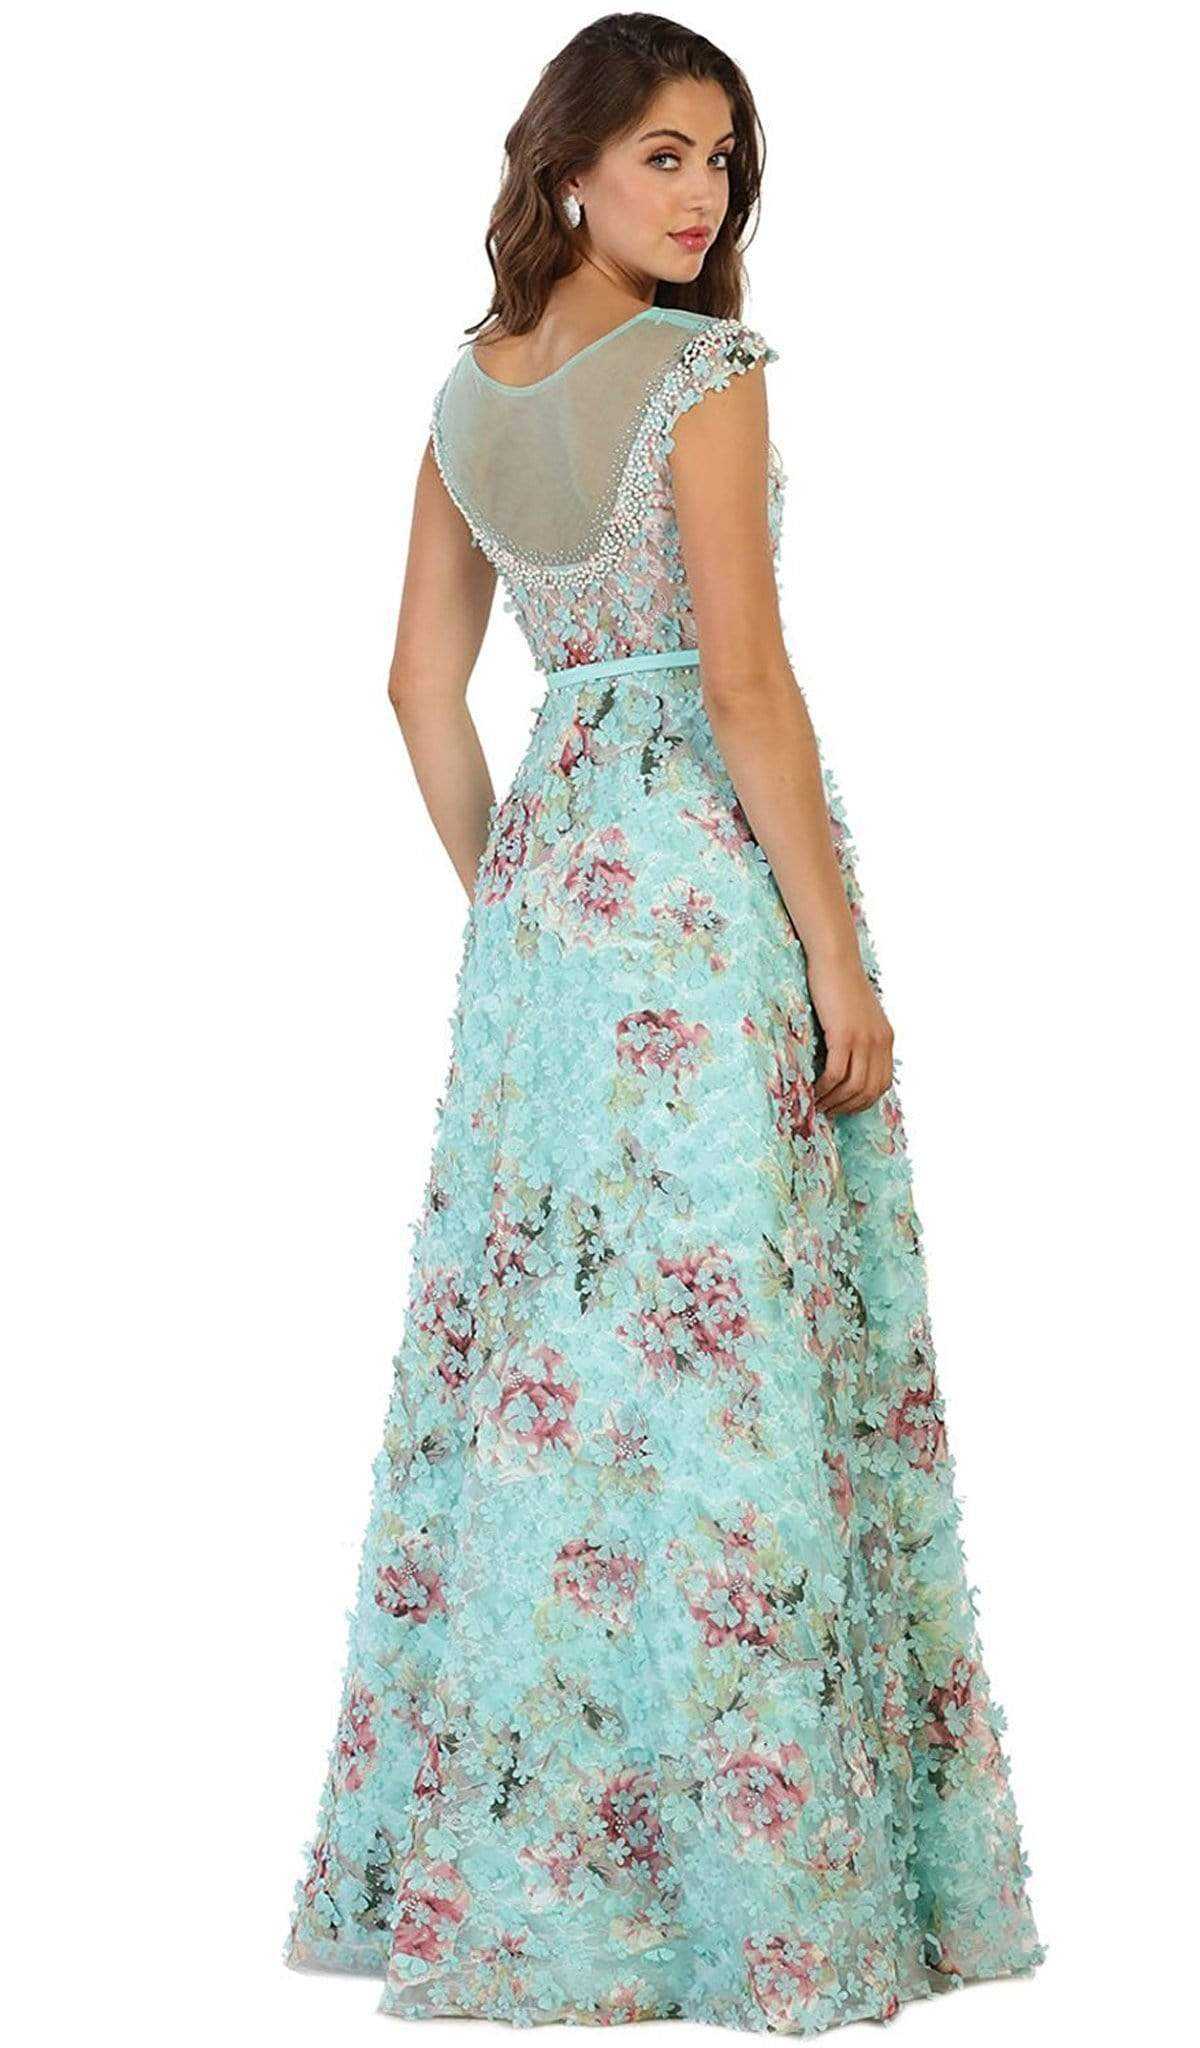 May Queen, May Queen - Sheer Cap Sleeves Floral Embellished A-line Gown RQ7554